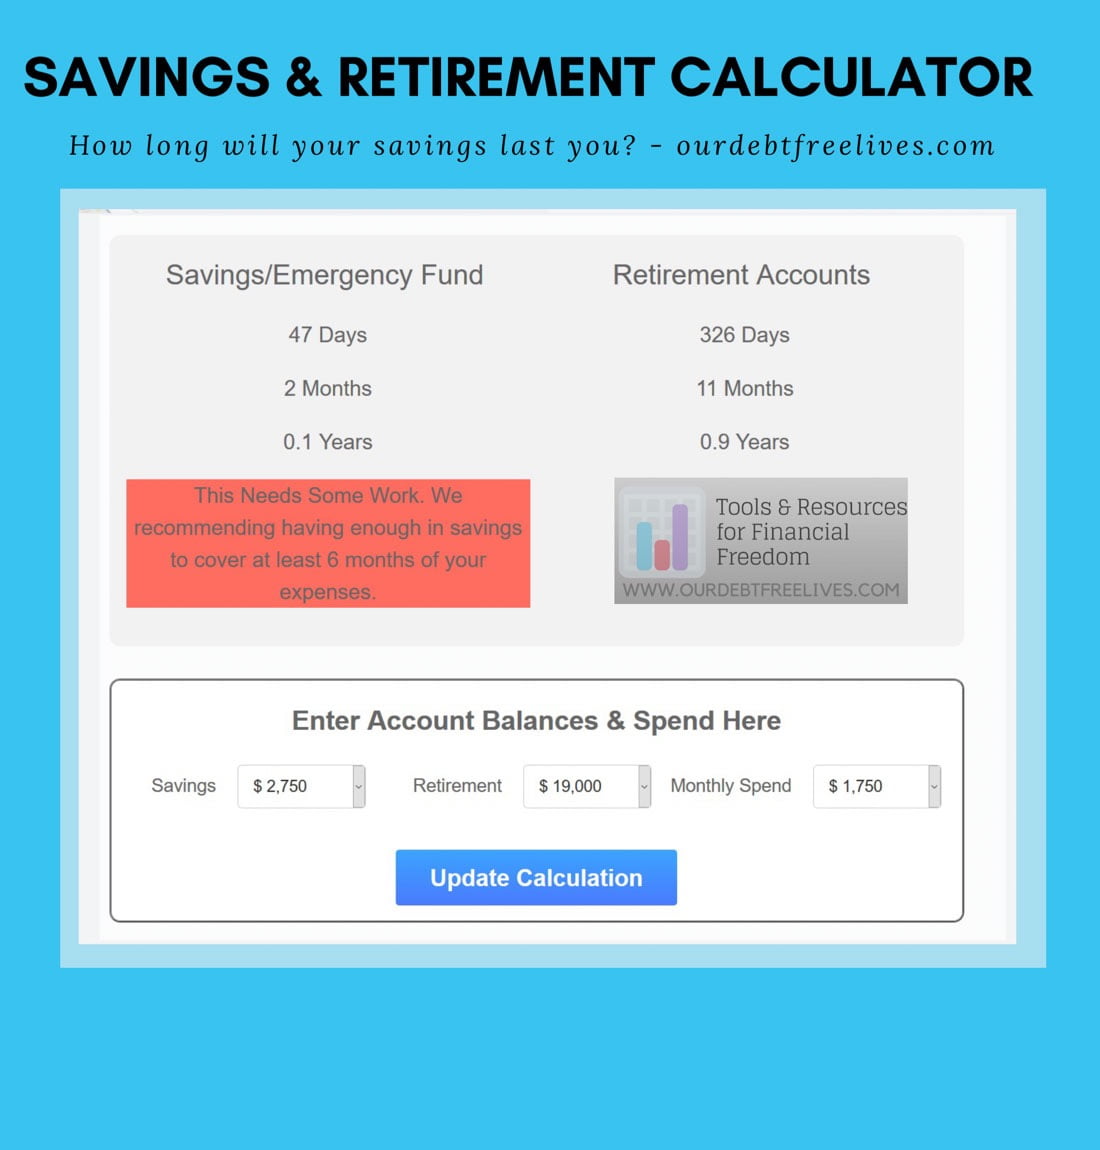 How Long Will Your Savings Last?